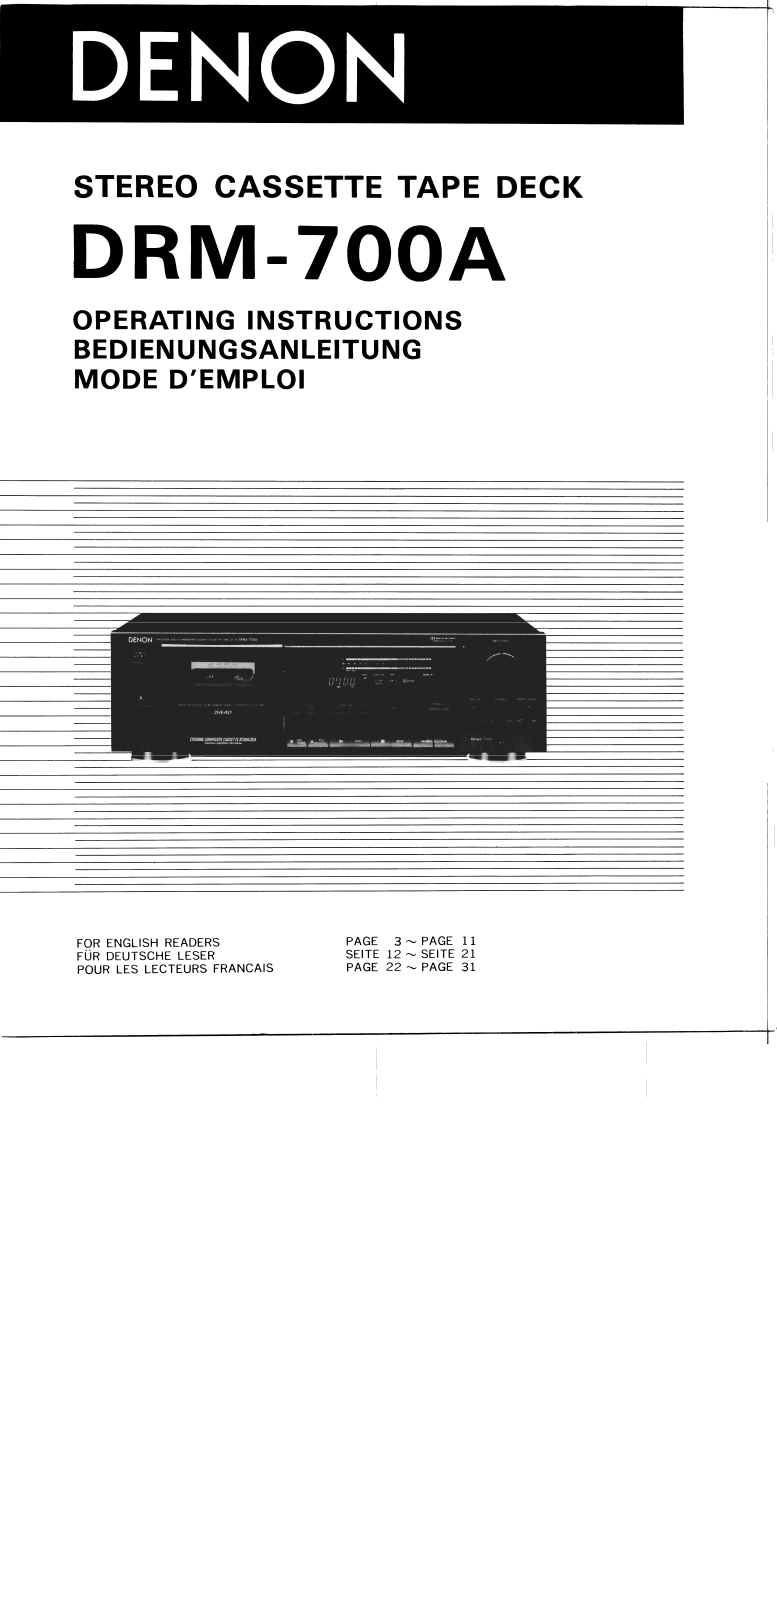 Denon DRM-700A Owner's Manual